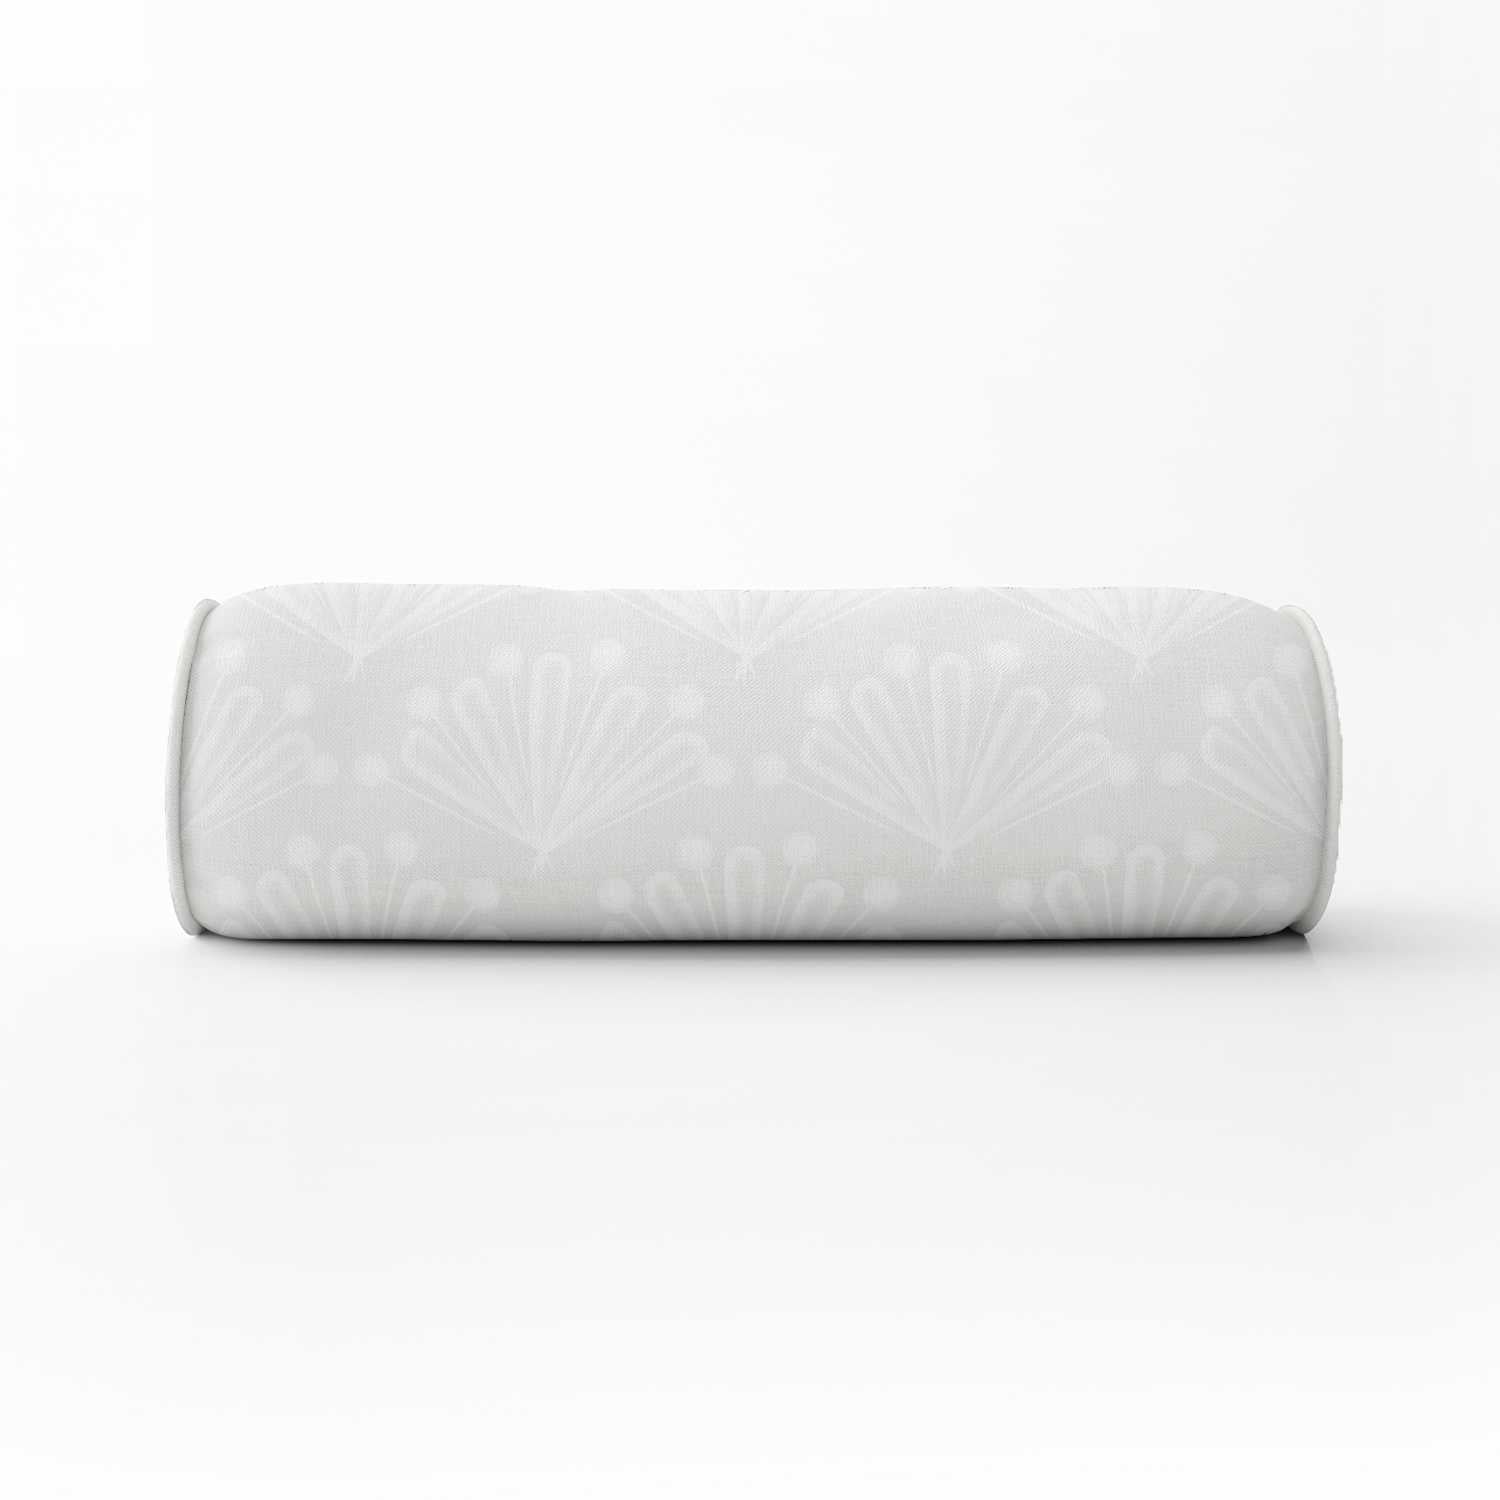 large-scale-grey-flower-bolster-ivory-piping.jpg